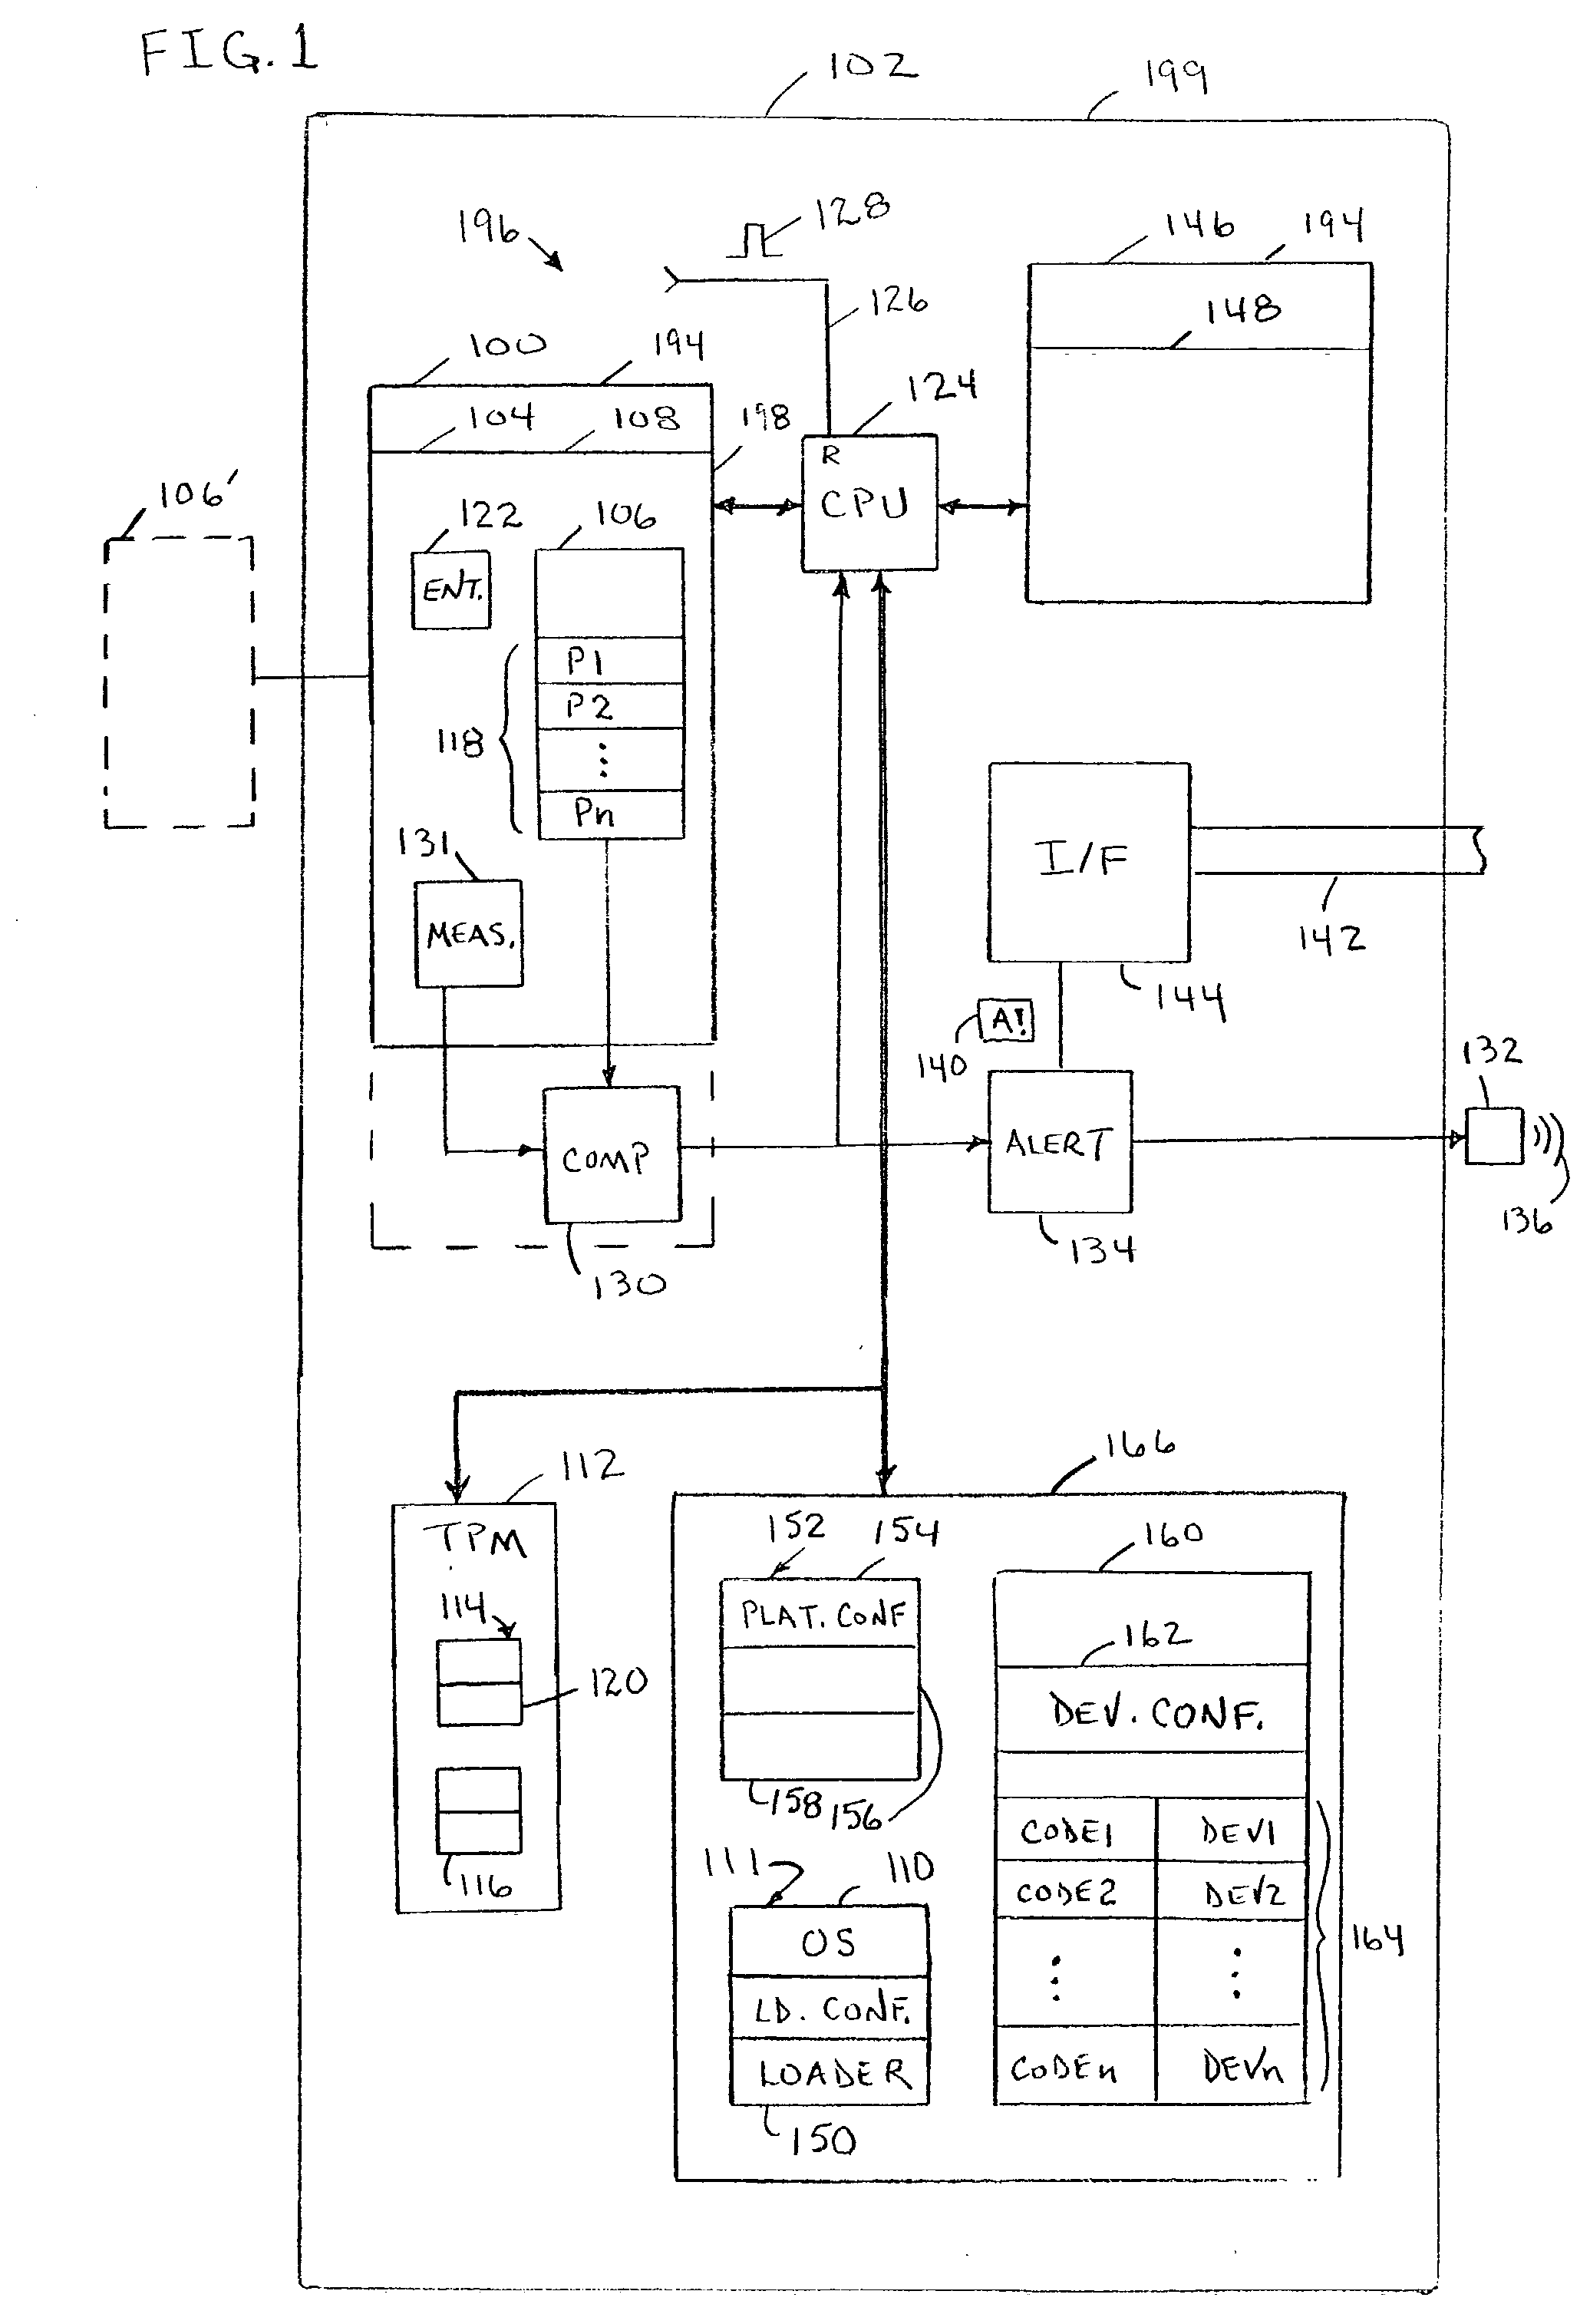 Trusted platform apparatus, system, and method